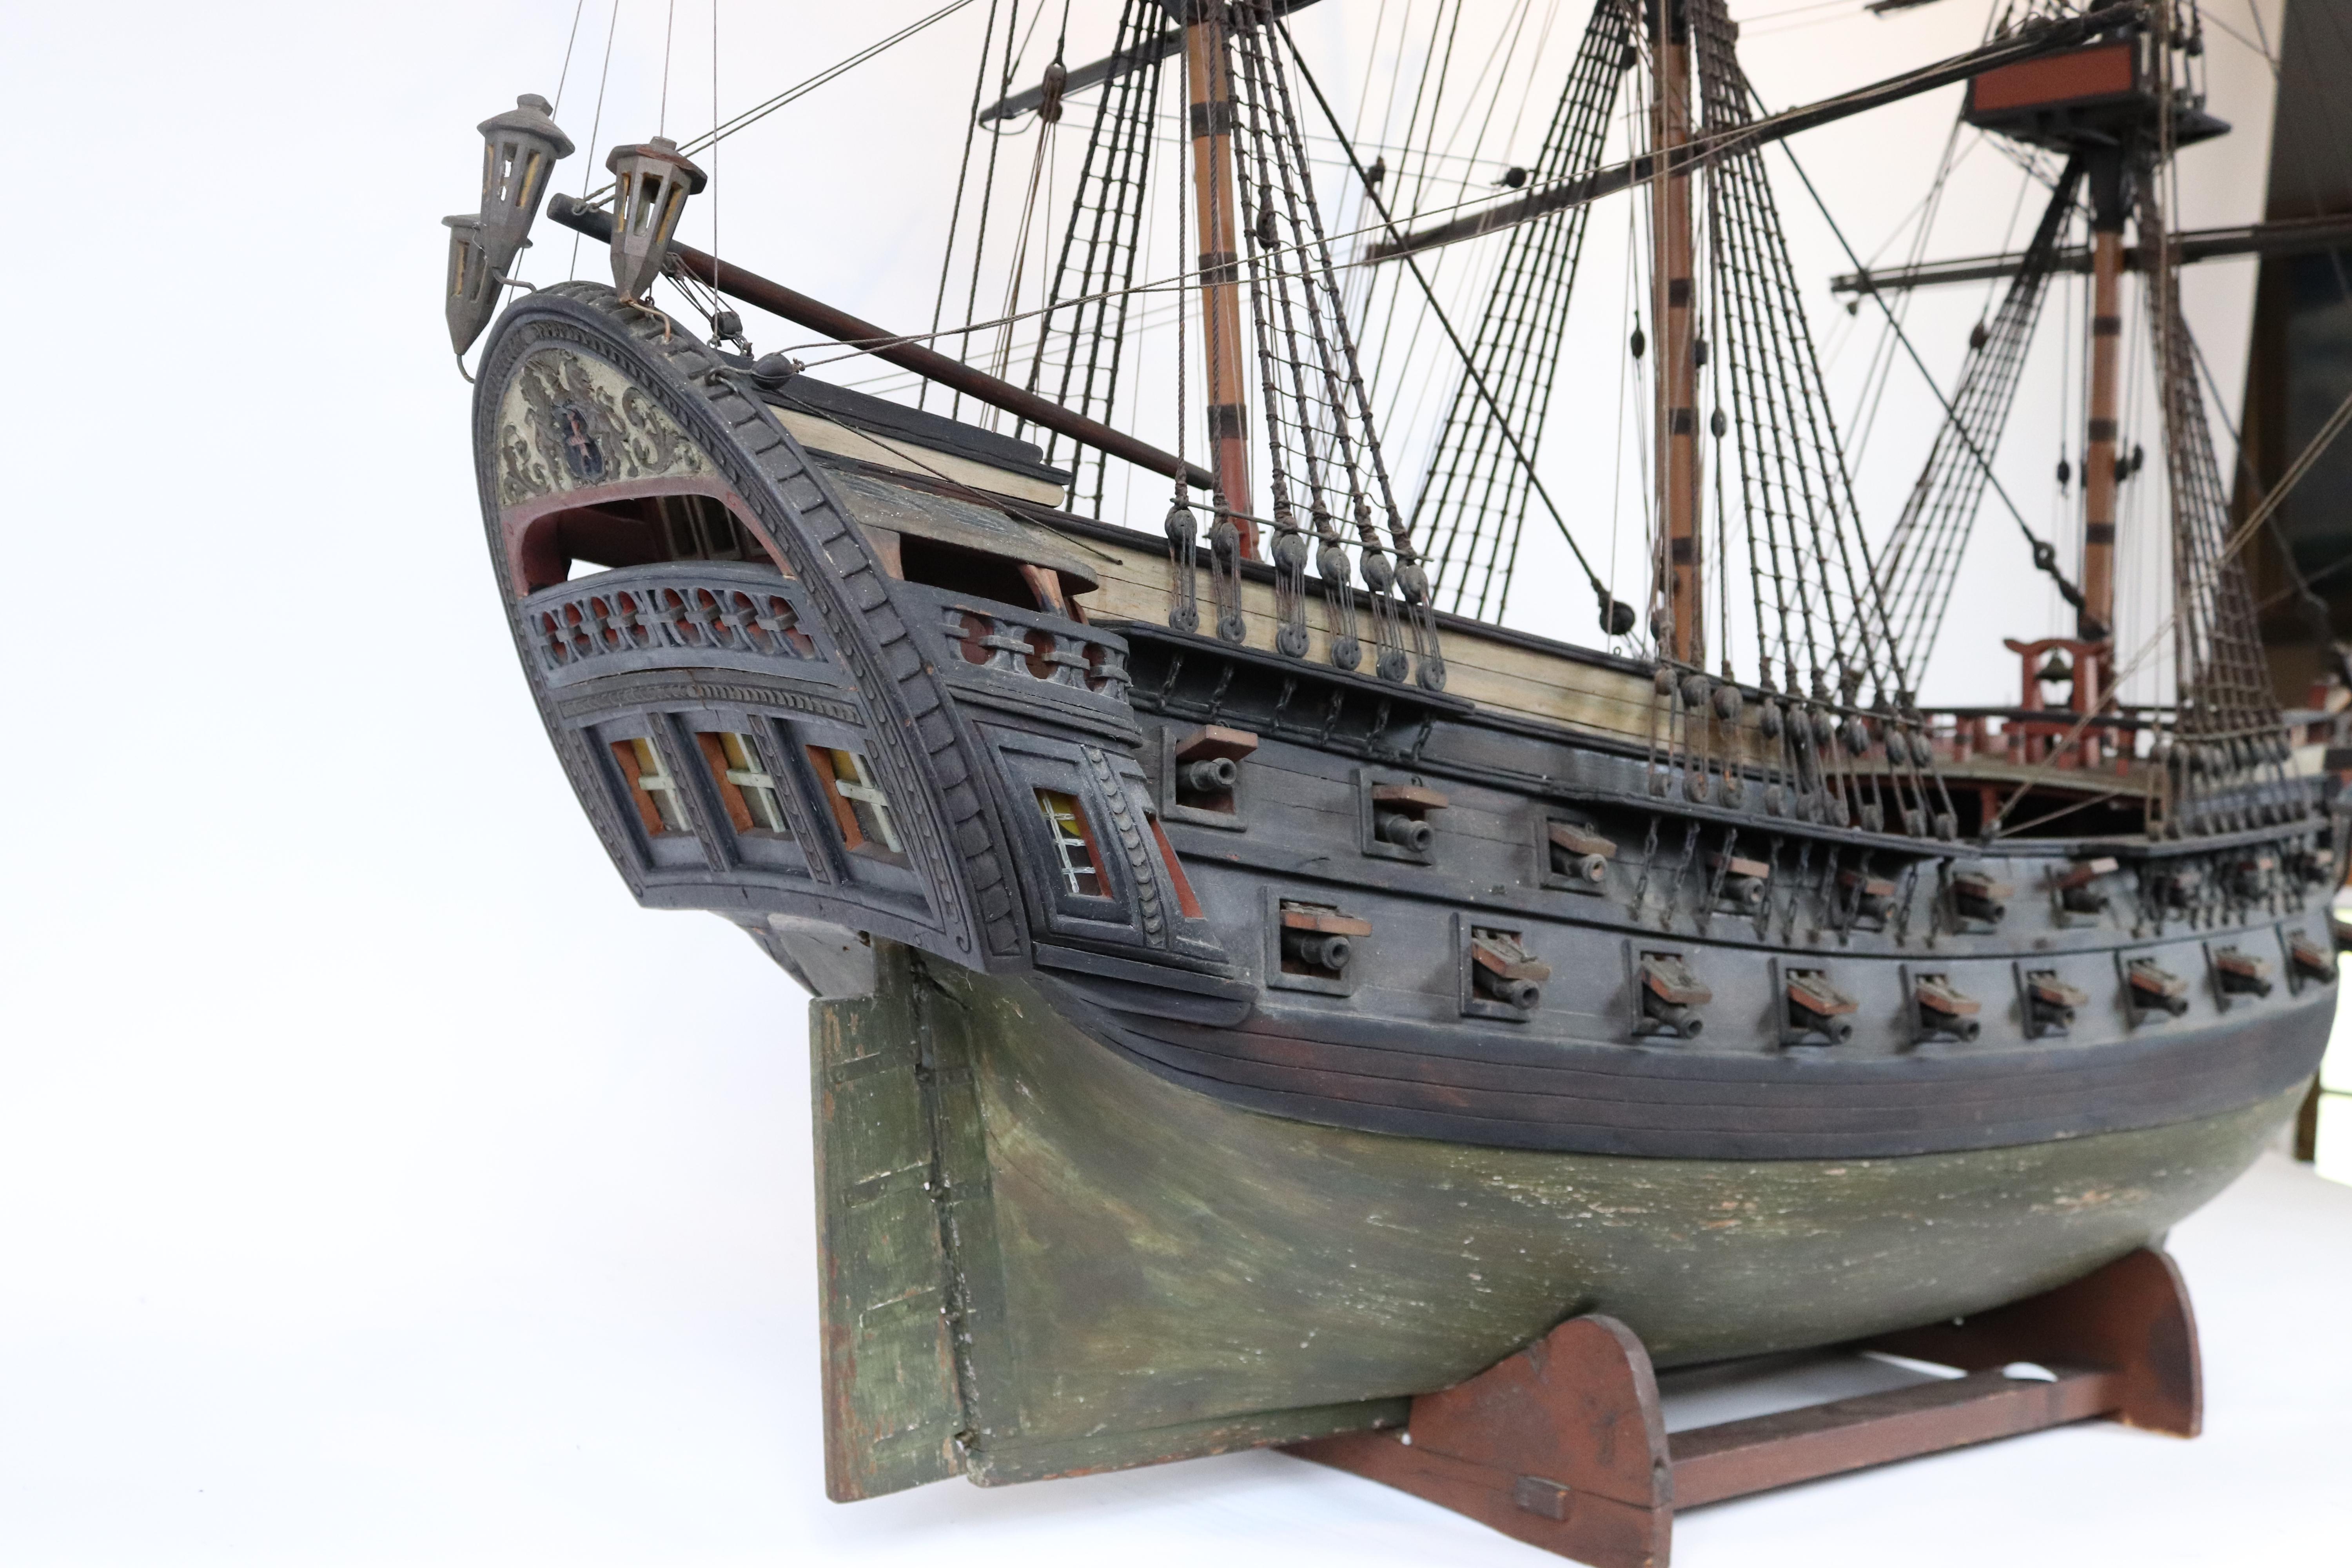 Large antique Spanish Armada-style model. Johnny Depp needs this model because it so resembles the black pearl. Awesome stern galleries and figurehead. Model carries forty guns on carriages. With wood cradle. Measure: 62